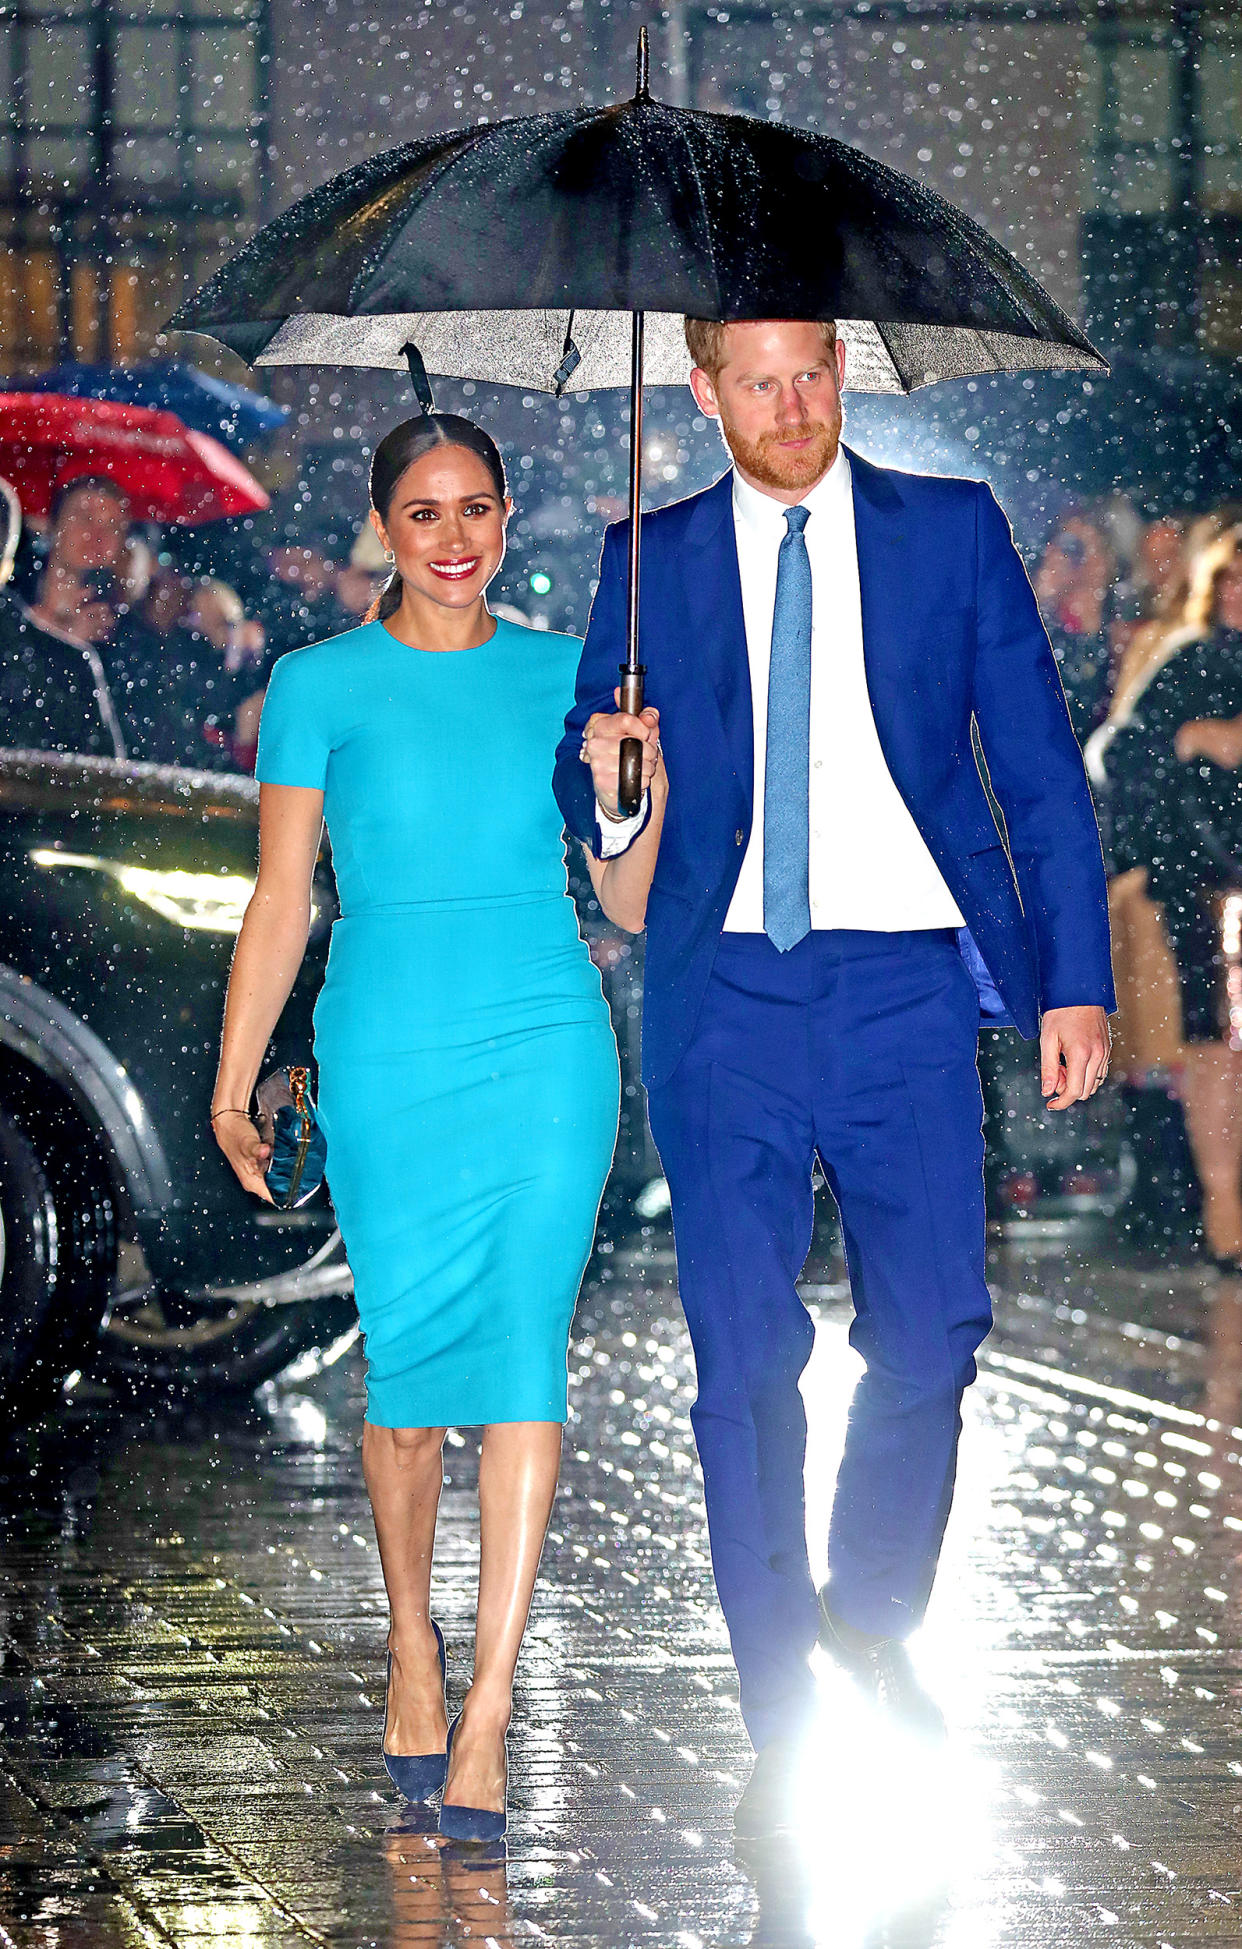 The Duke And Duchess Of Sussex Attend The Endeavour Fund Awards (Chris Jackson / Getty Images)